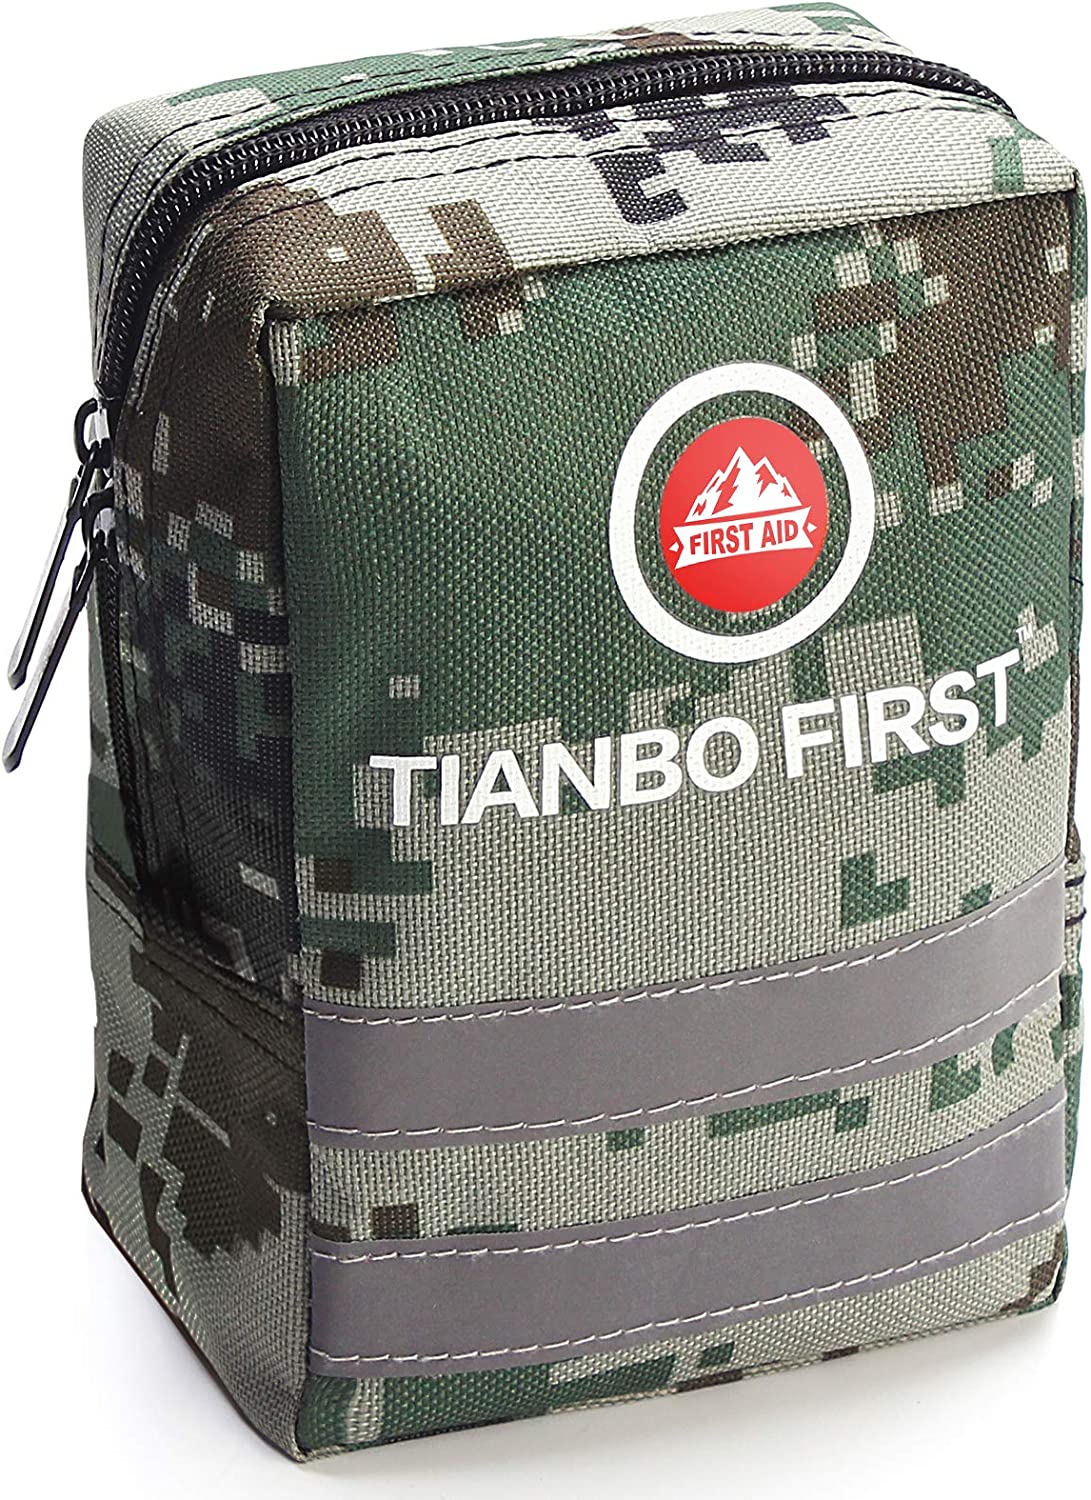 TIANBO FIRST Small First Aid Kit, 120 Pieces Personal First Aid Kit, Outdoor Emergency Survival Bag, Compact Medical Safety Case for Camping Hiking Travel Hunting Family School Car